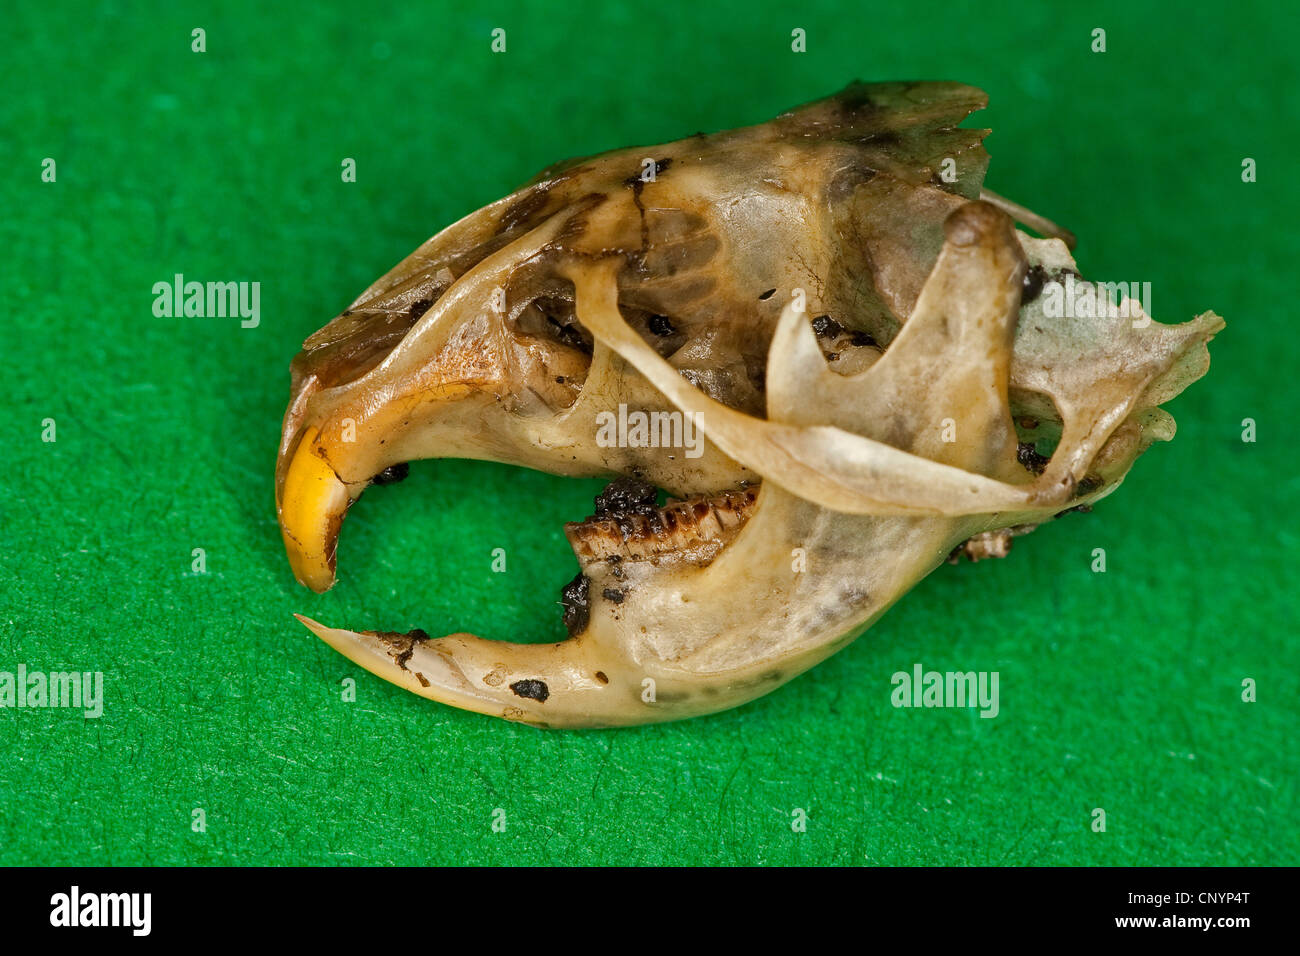 Barn owl (Tyto alba), skull and lower jaw of a mouse, undigested food residue from a pellet Stock Photo